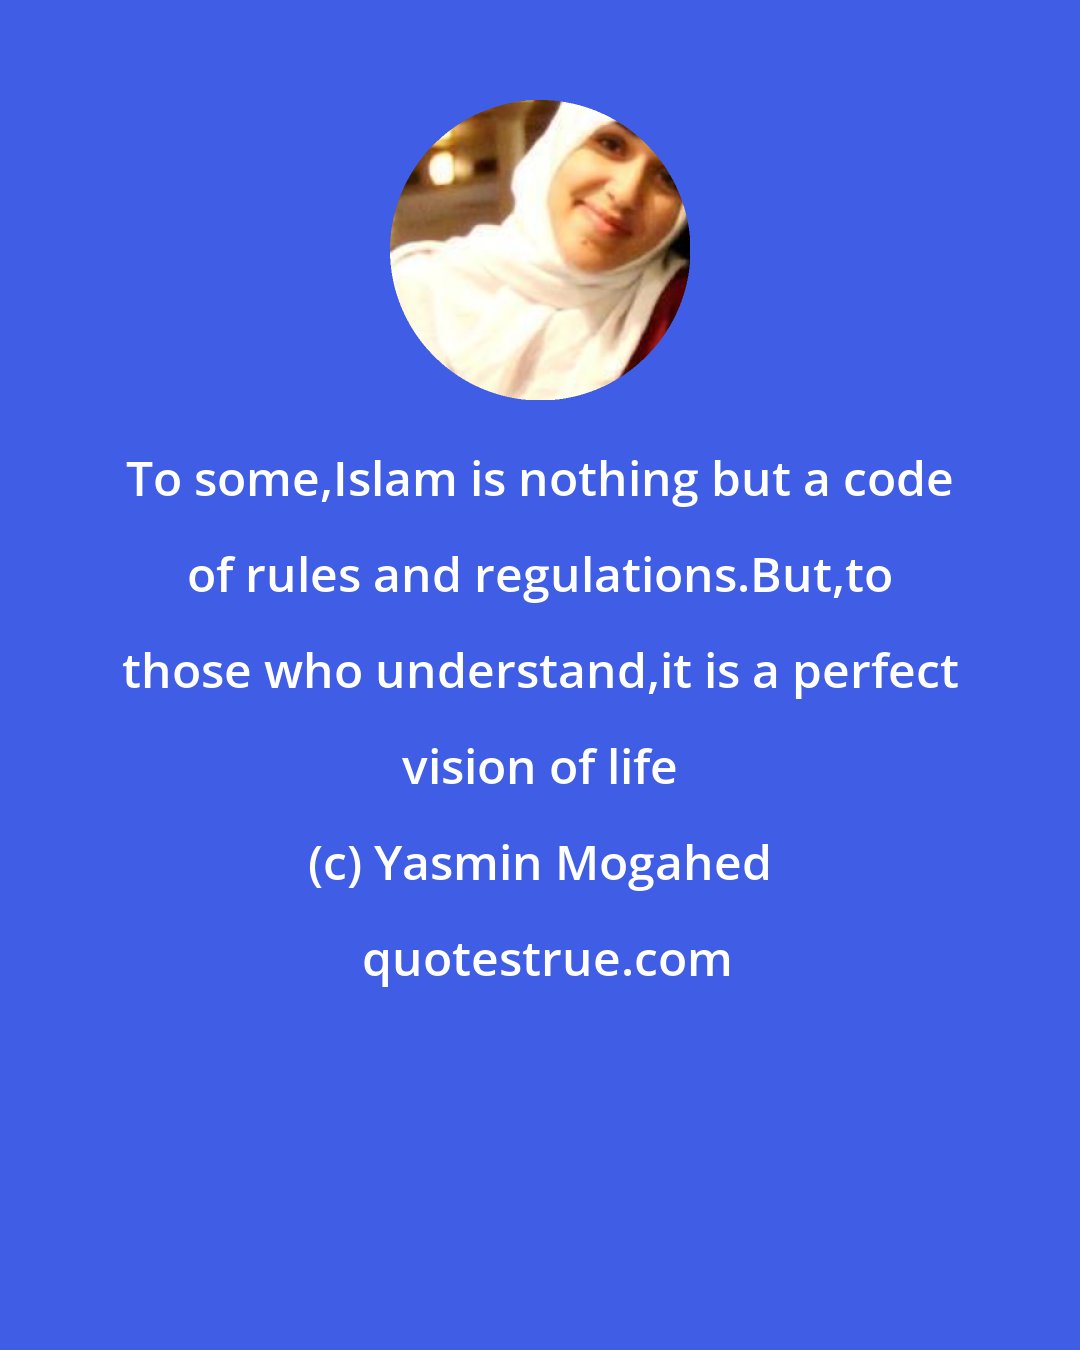 Yasmin Mogahed: To some,Islam is nothing but a code of rules and regulations.But,to those who understand,it is a perfect vision of life